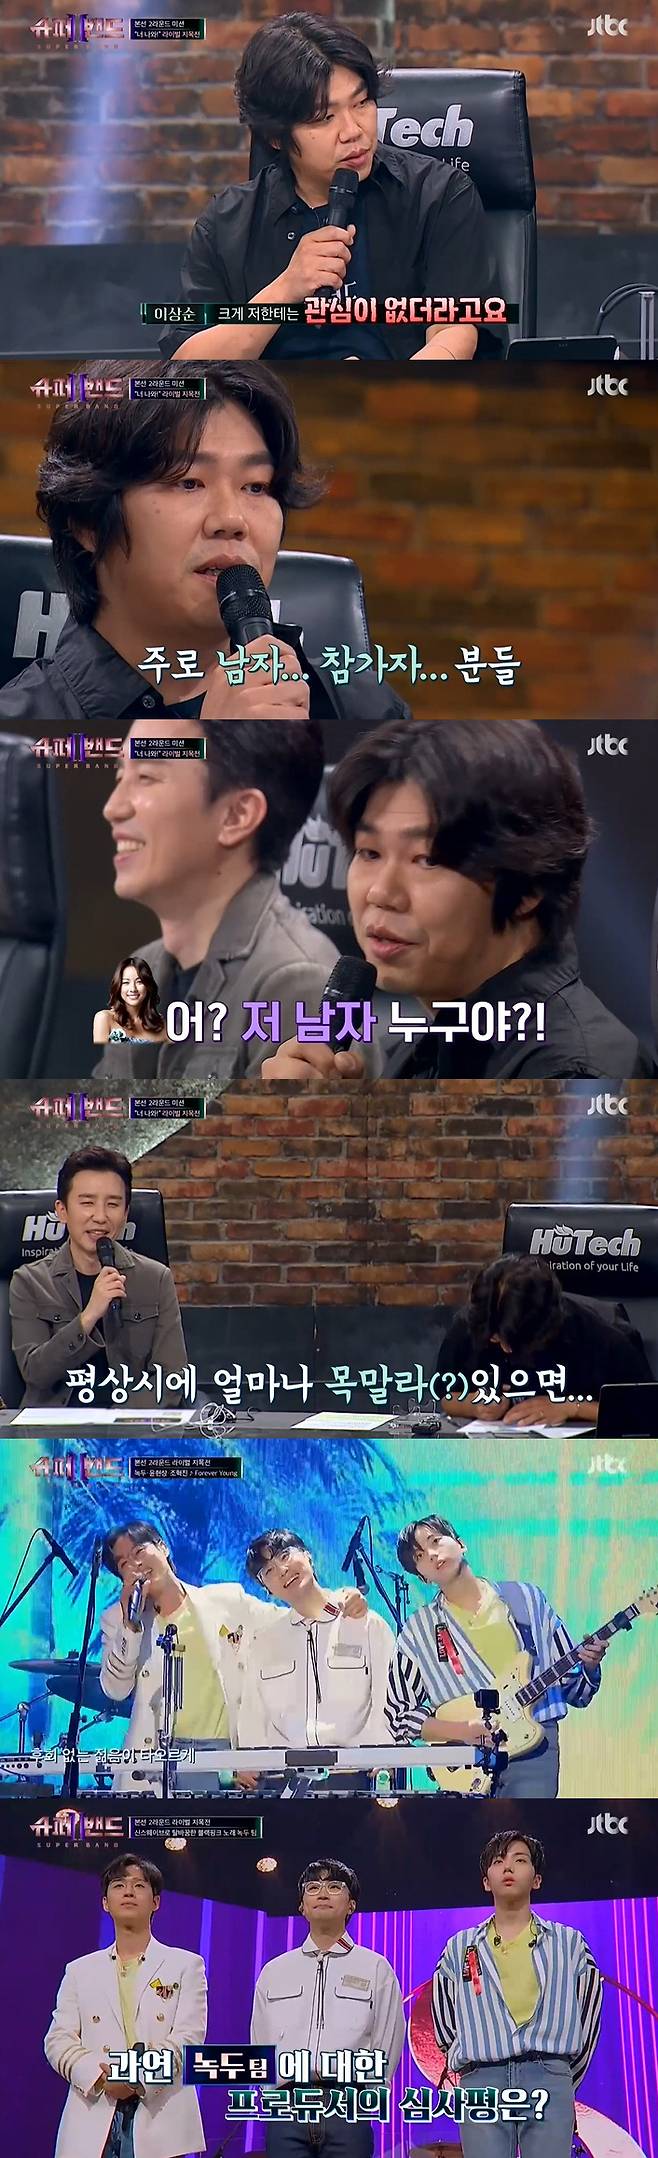 Lee Sang-soon reveals Lee Hyoris reaction to watching Alvin and the Chipmunks: The SqueakquelJTBC Alvin and the Chipmunks: The Squeakquel, which was broadcast on the 26th, was released after the first round of the finals.The second round of Rivers Point of Fame was followed.On this day, Hwang Hyun-jos team showed the stage that reinterpreted UVs Itaewon Freedom as a nuisance genre of urban mood.Producers on the stage, which is thoroughly prepared not only for the sound but also for the stage production, praised it as a stage that was very good than any bands stage.In particular, You Hee-yeol noted that this friend seems to be a thing about the frontman Hwang Hyun-jo.Lee Han-seo, who confronted Hwang Hyun-jos team, reinterpreted the Latin, Korean music and classical music by combining part of Pansori with Besame Mucho.In particular, Kim Sol Daniel, who was the first player that other participants wanted to share, was together, and Lee Han-seos stage was more anticipated.It is Feelings that forced the Besame Mucho into the color of this team, said Yoon Jong Shin. I heard less of Feelings that the mashup was good with one song.You Hee-yeol pointed out that the composition of Chunhyangga and Besame Mucho lacked probabilities.As a result of the producer vote, Hwang Hyun-jos team won 5-0, and Lee Han-seos team became a candidate for elimination.The match was a match between Balo and Damian teams, which were composed of members who had never been staged as a band before, which caused curiosity.Those who arranged the OST A Million Dreams of the movie Great Showman gave a stage to maximize the hopeful Feelings.After the teams stage was over, the producers gave mixed reviews.You Hee-yeol said, I feel like I have tried to make a sound, but I have a bad part because I have no experience of joining.However, Yoon Sang praised the three peoples performances, selections and harmony, saying, I did not have such a mess. I am so cool that I am so heartbroken.I dont know if Ive passed the sloppyness that only a cold person can know, he said, sniping You Hee-yeol (?), so You Hee-yeol said, Im a really bad brother.When I recorded it together, I was really annoyed and closed the door and went out. Lee Sang-soon also laughed at the support shot that he was the most sensitive person here. Yoon Jong Shin expressed regret for the selection that did not fit the vocalist Mun Soo Jins range, and Lee Sang-soon was acclaimed as a possible band.Damians team selected Boom and presented an experimental sound such as vocoder, electronic music source of Future bass sound, and chic guitar line to maximize dynamics.After Damians stage, CL revealed that this was the hardest stage ever; he said the arrangement was so good but I was sorry for Performance.It was a strong song, but I was sorry that Attitude did not come out, but the arrangement was good and cool.Lee Sang-soon also pointed out his regrets for Performance.On the other hand, Yoon Sang commented, I think its right to pretend to be indifferent; the arrangement was a bit good.However, he expressed regret for the vocals, and Yoon Jong Shin also sympathized.You Hee-yeol also shared her regrets for vocals, but praised Damian for her potential and called her growth character.The results of the two teams, which received favorable reviews and criticism side by side, were 4-1, and the team succeeded in entering the next round.The last stage was a two-member Lee Dong-heon team and Kim Sung-ong team.Lee Dong-heon, who selected Someone Like You, set up a chord with a male duet and added warmth with acoustic guitar to show the stage arranged.On the stage of the two people who played only with vocals, Yoon Jong Shin said, The tone of both people was well heard. I do not try too much to do this, and I think I have Choices to listen to the two voices and the sound of flying.I think the song is well Choices. Lee Sang-soon also said, I thought I wanted to see two people with the band.I made it more curious when I was with the band. Kim Sung-ong, who collected topics by age 18, played the stage of Candy Shop Girl, which reinterpreted Tobacco Shop Girl.The stage of the two men, who overcame the 18-year-old difference and showed fantastic musical synergies, made other participants enthusiastic.It was so exciting, the arrangement was good, it was an entertaining stage overall, CL praised.Yoon Jong Shin praised Kim Sung-ongs performance and consideration, and the performance of Other Shindong Idaon. Lee Sang-soon also commented on Idaon, I think gifted people are right.I think it will be something. Kim Sung-ongs production skills and leadership were also raised. The results of the two teams that made the crisis an opportunity were 4-1.After the final stage, the final Out box of the first round of the finals was released; Out box was five members of the bands: Sunjae, Sung Hyuk, and Handadu (Lee Han-seo, Kim Da-ham, and Song Doo-yong).The 48 participants who entered the second round of the finals through the harsh mission prepared a new mission, River Landing.Prior to the full-fledged second round stage, MC Jeon Hyun-moo asked producer Lee Sang-soon to respond to Lee Hyori.Lee Sang-soon then replied, The participants were so good that I was not interested in me very much. As for the participants who were watching, I am mainly interested in male participants.Even if you look at the waiting room scenery passing by for a while, you keep asking, Who is that handsome man?You Hee-yeol, who heard this, said, I know how thirsty you are in normal times.On the other hand, the first round of the second round was played by the Mungdu team and the donation team. The Mungdu team, which was in the forefront, selected Black Pinks Forever Young and received praise from producers.In particular, CL said, It seems that the green beans and Yoon Hyun-sang have brought up the bright energy of Cho Hyuk-jin. I felt that the harmony of the team was so important.Yoon Jong Shin also praised the production ability and vocal ability of mung beans.You Hee-yeol said, There is no performance-oriented show, and it is complete with a musical structure that is perfectly structured even if it is just heard by the sound source. I want to applaud the three-member band who produced the sound faithfully.